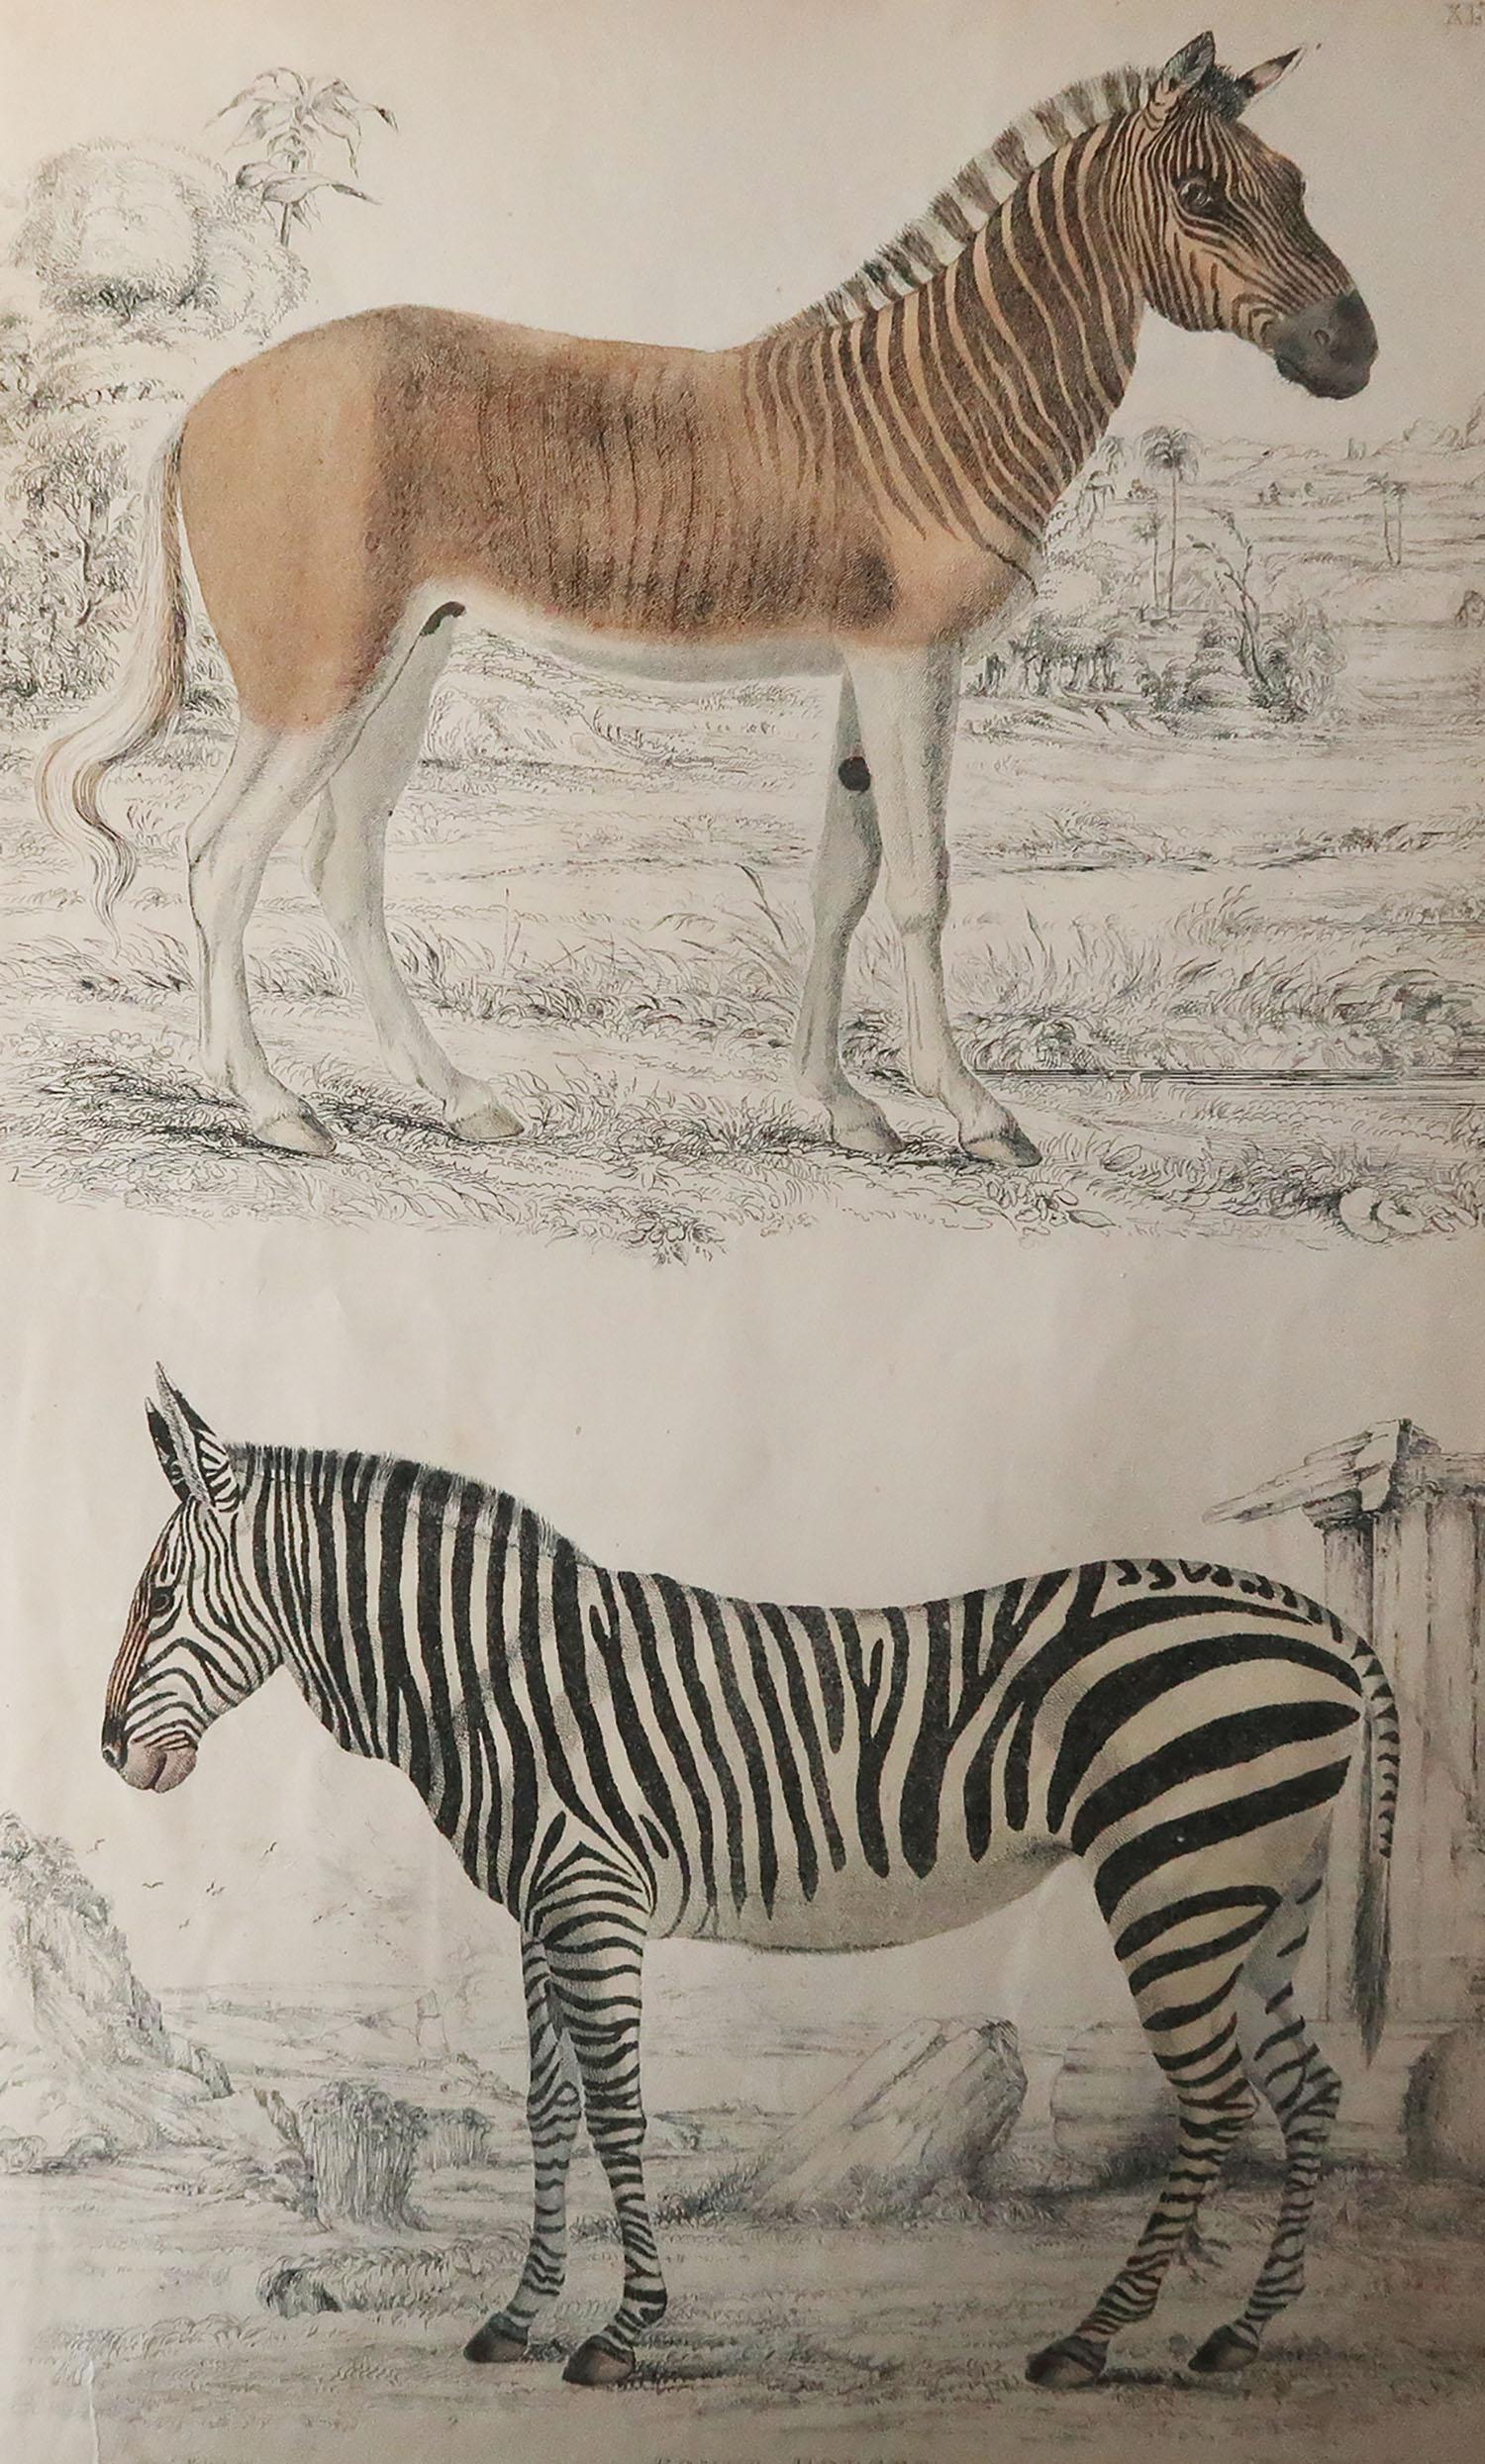 Great image of zebras

Unframed. It gives you the option of perhaps making a set up using your own choice of frames.

Lithograph after Cpt. Brown with original hand color.

Published circa 1835.

Repair to a minor edge tear on bottom